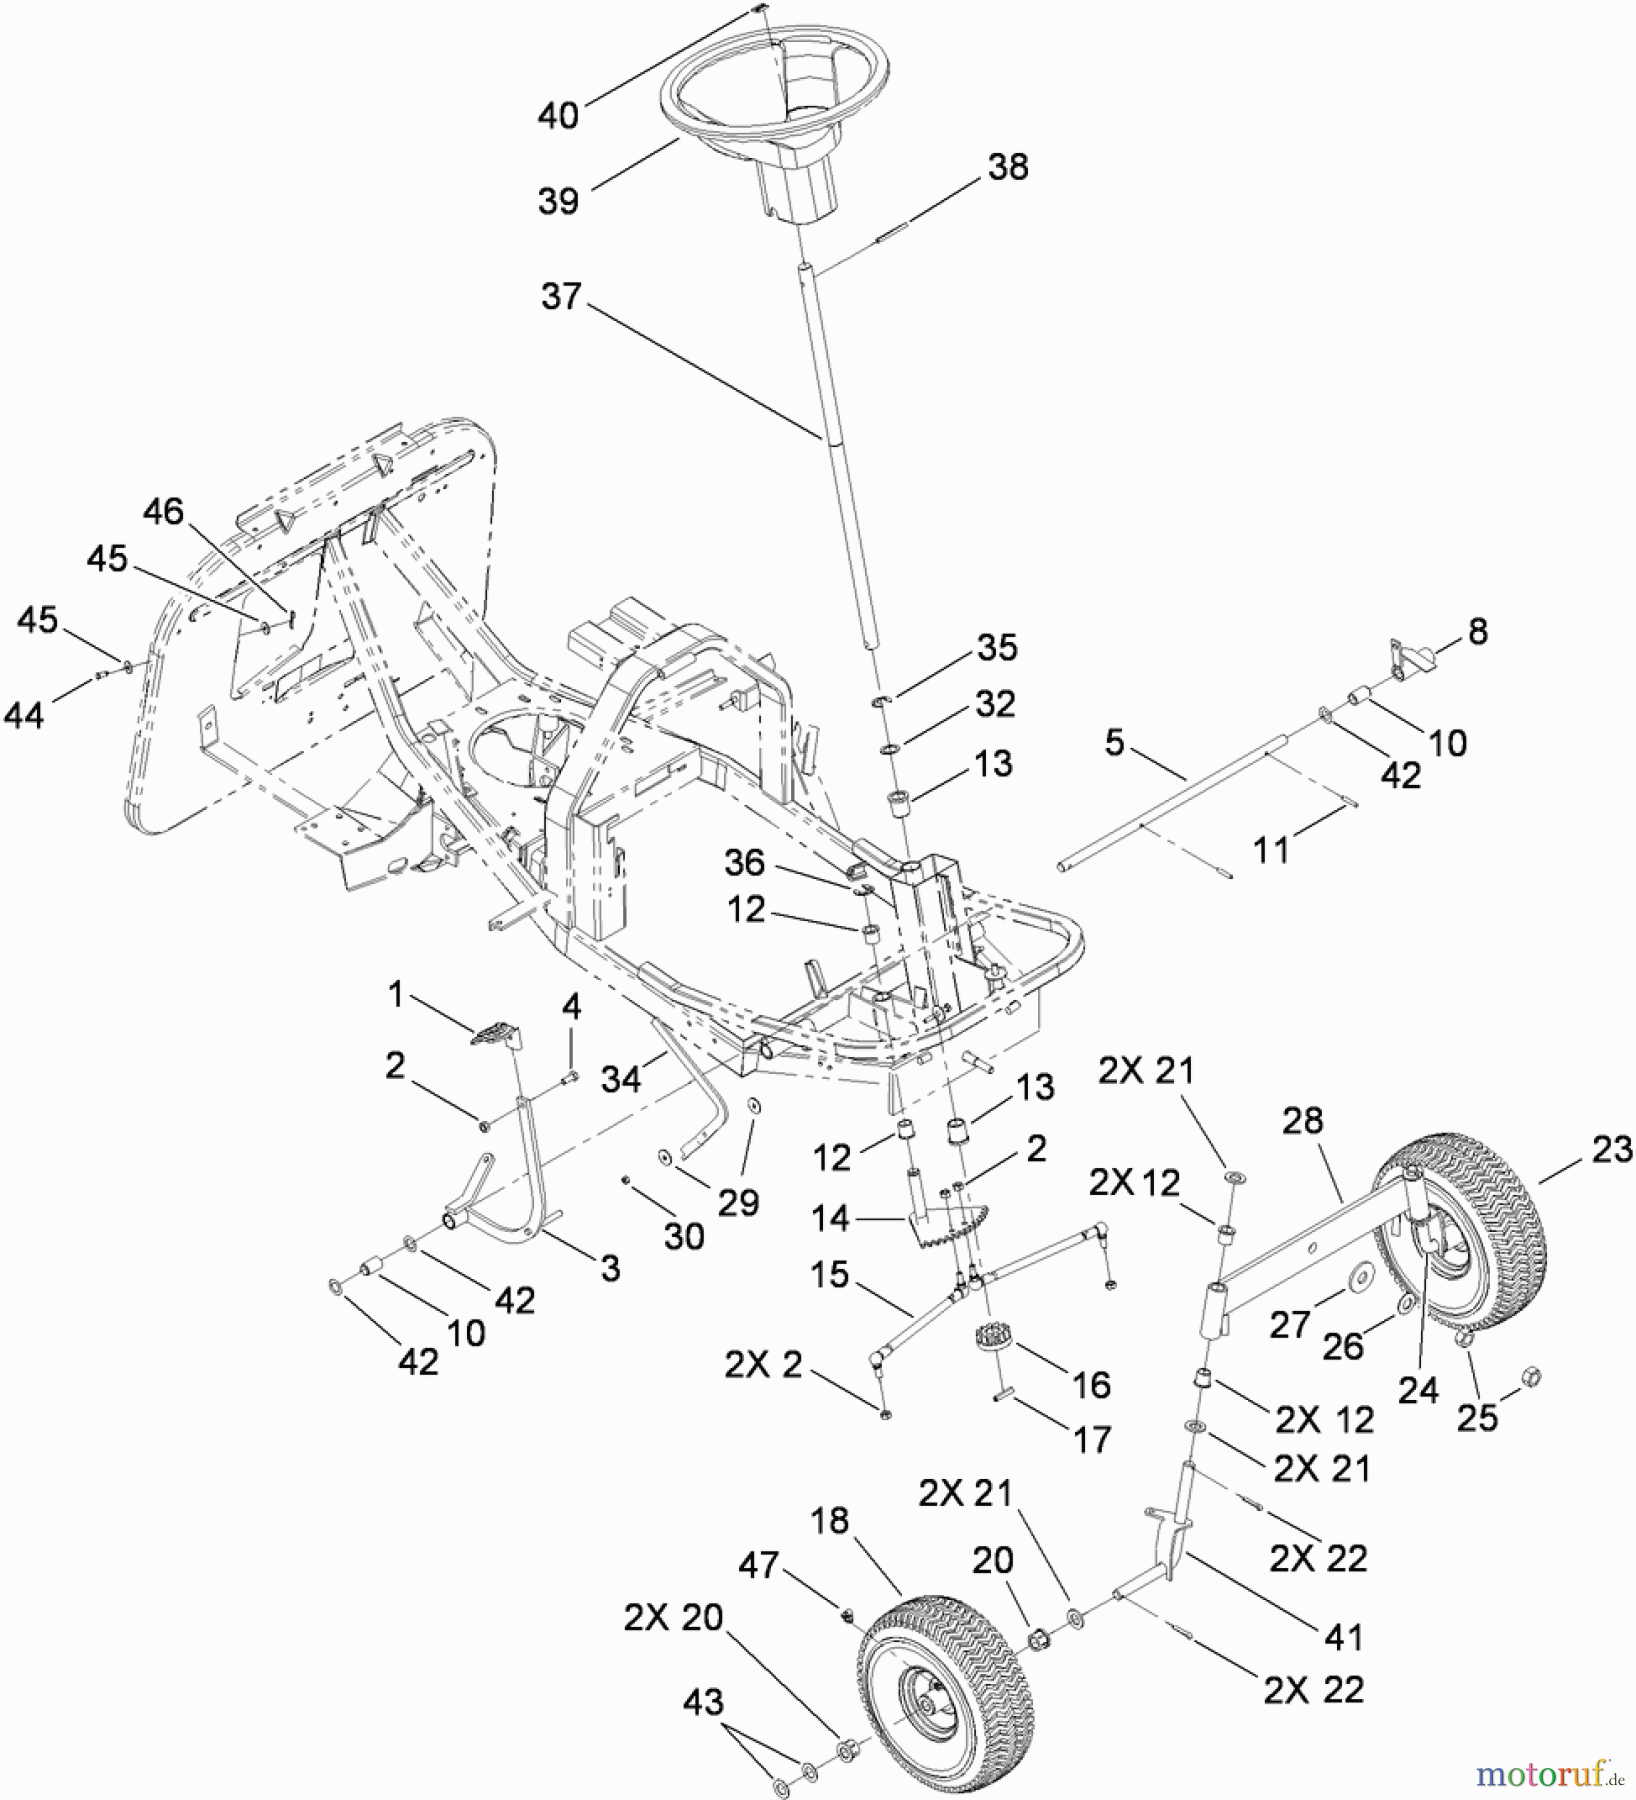  Toro Neu Mowers, Rear-Engine Rider 70185 (G132) - Toro G132 Rear-Engine Riding Mower, 2010 (310000001-310999999) FRONT AXLE AND STEERING ASSEMBLY